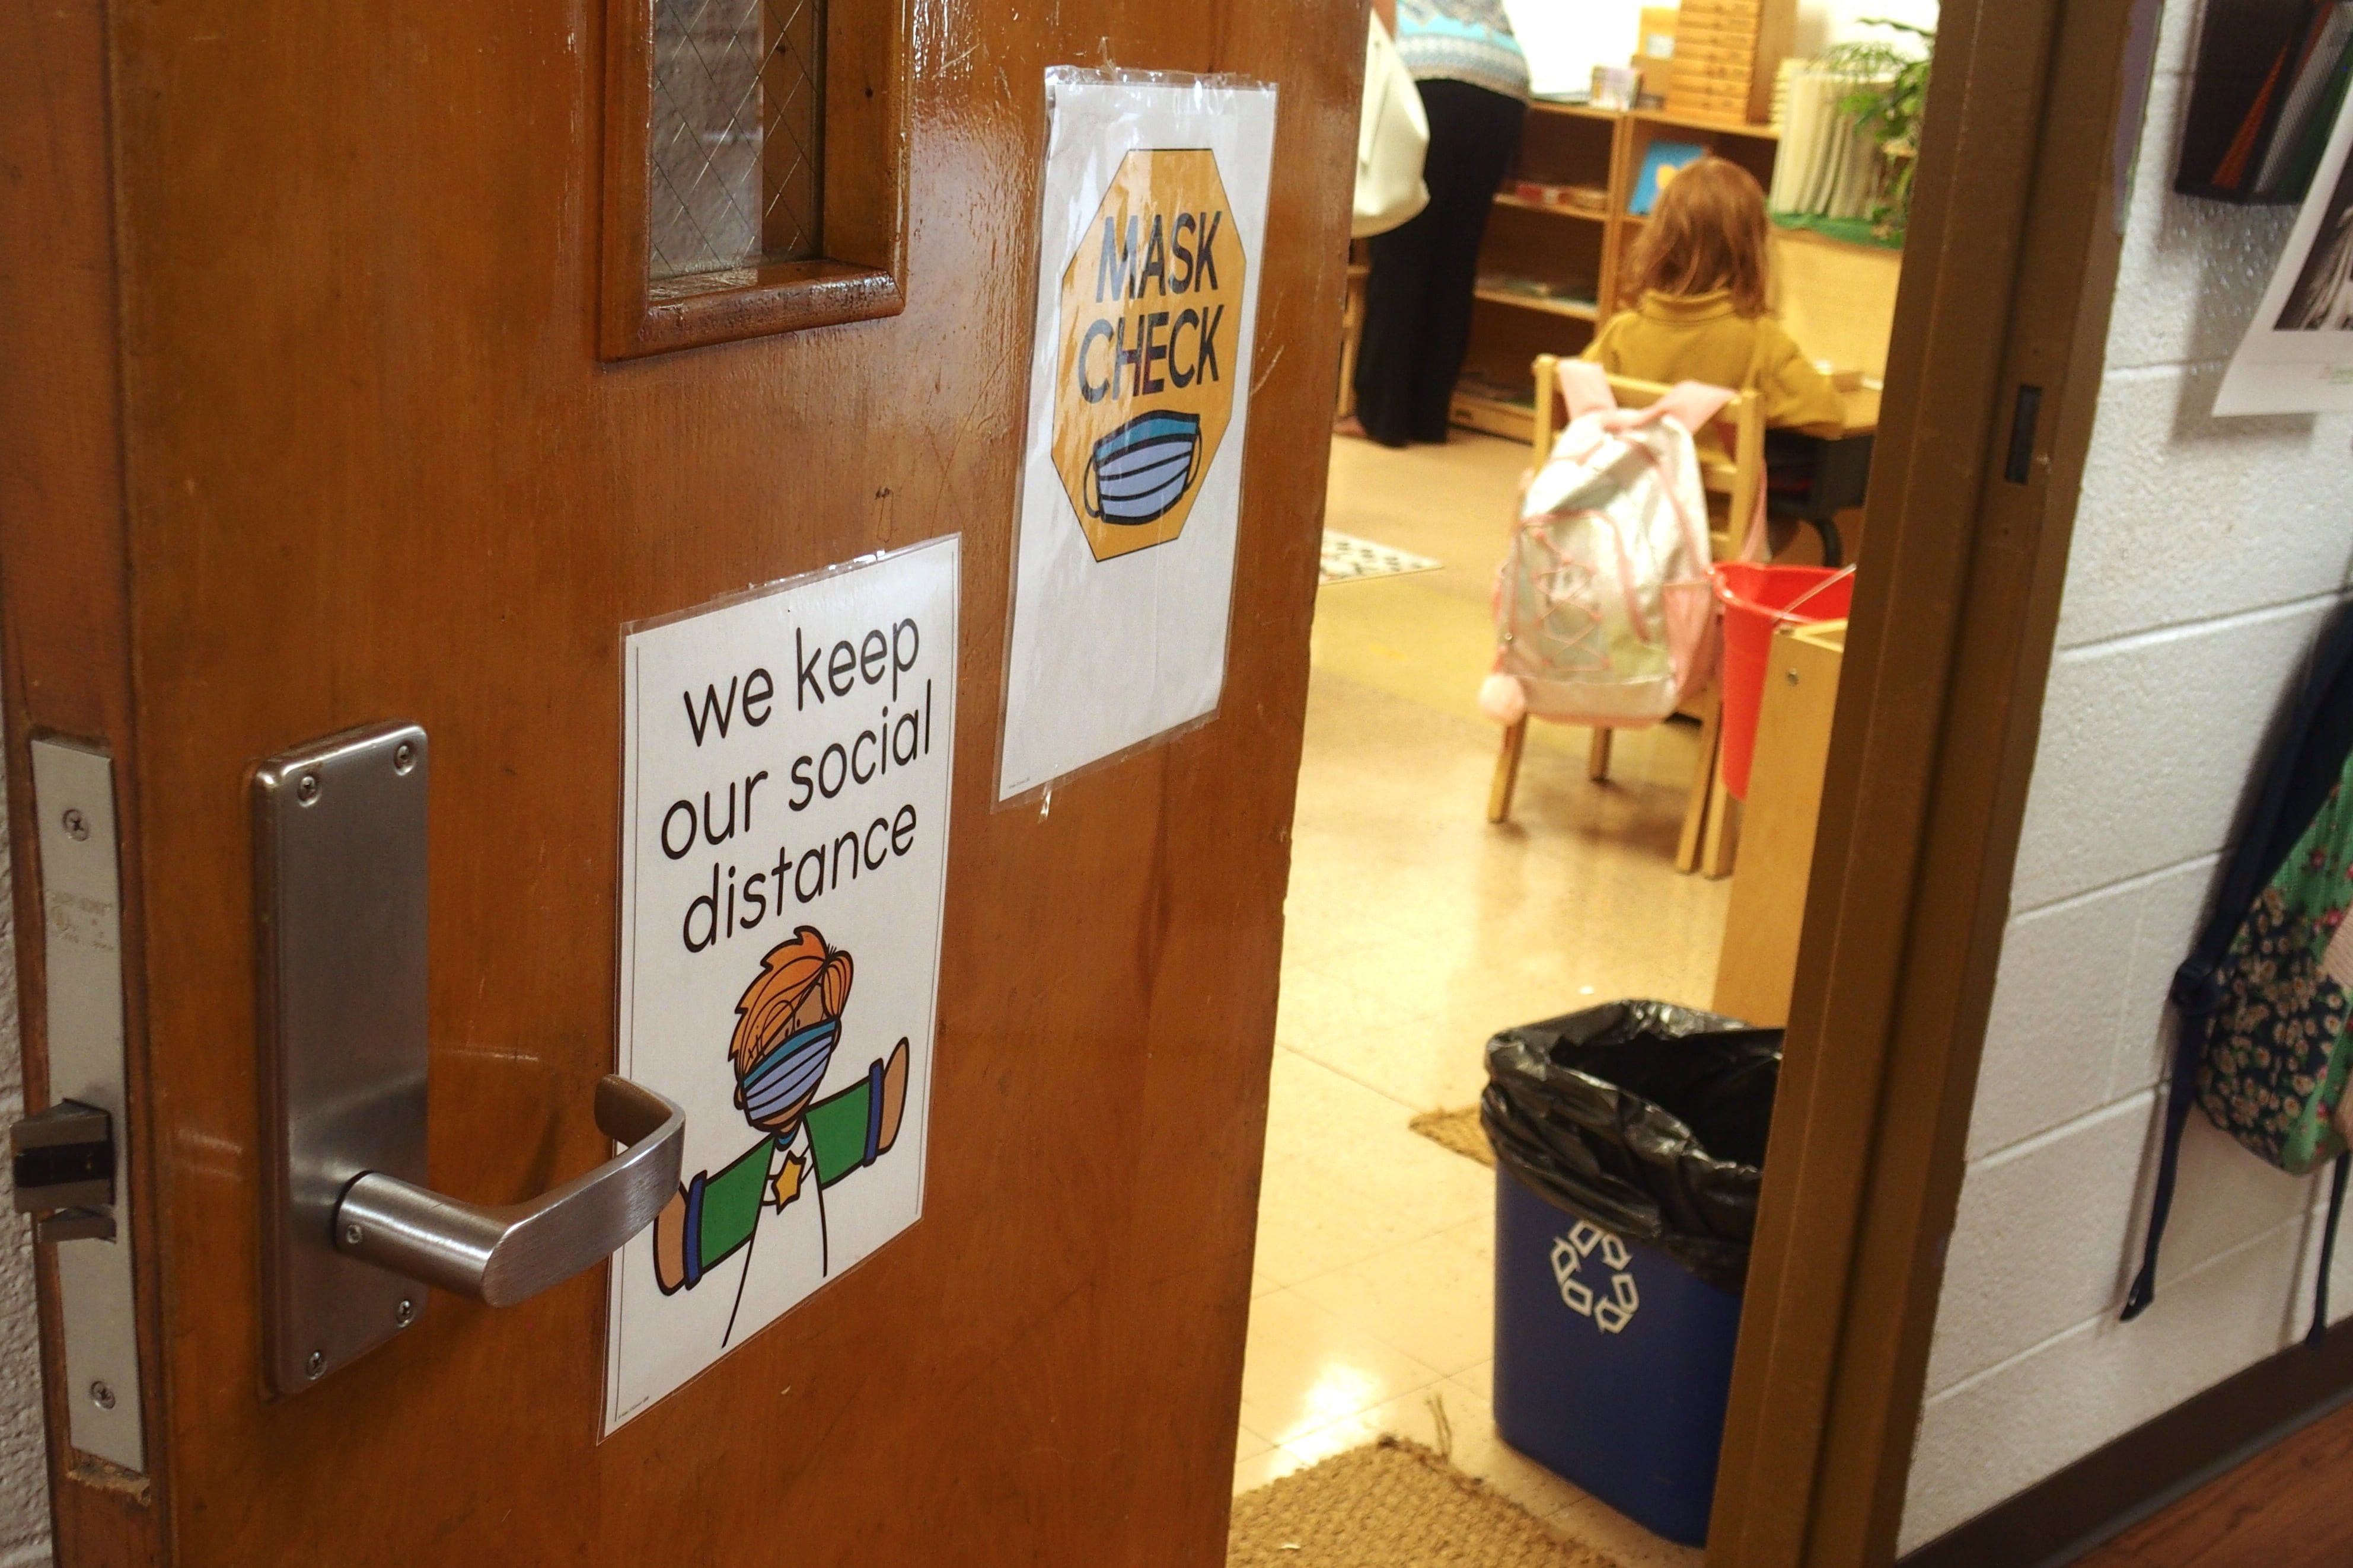 A classroom door with two signs: one says “mask check” and the other says “we keep our social distance”